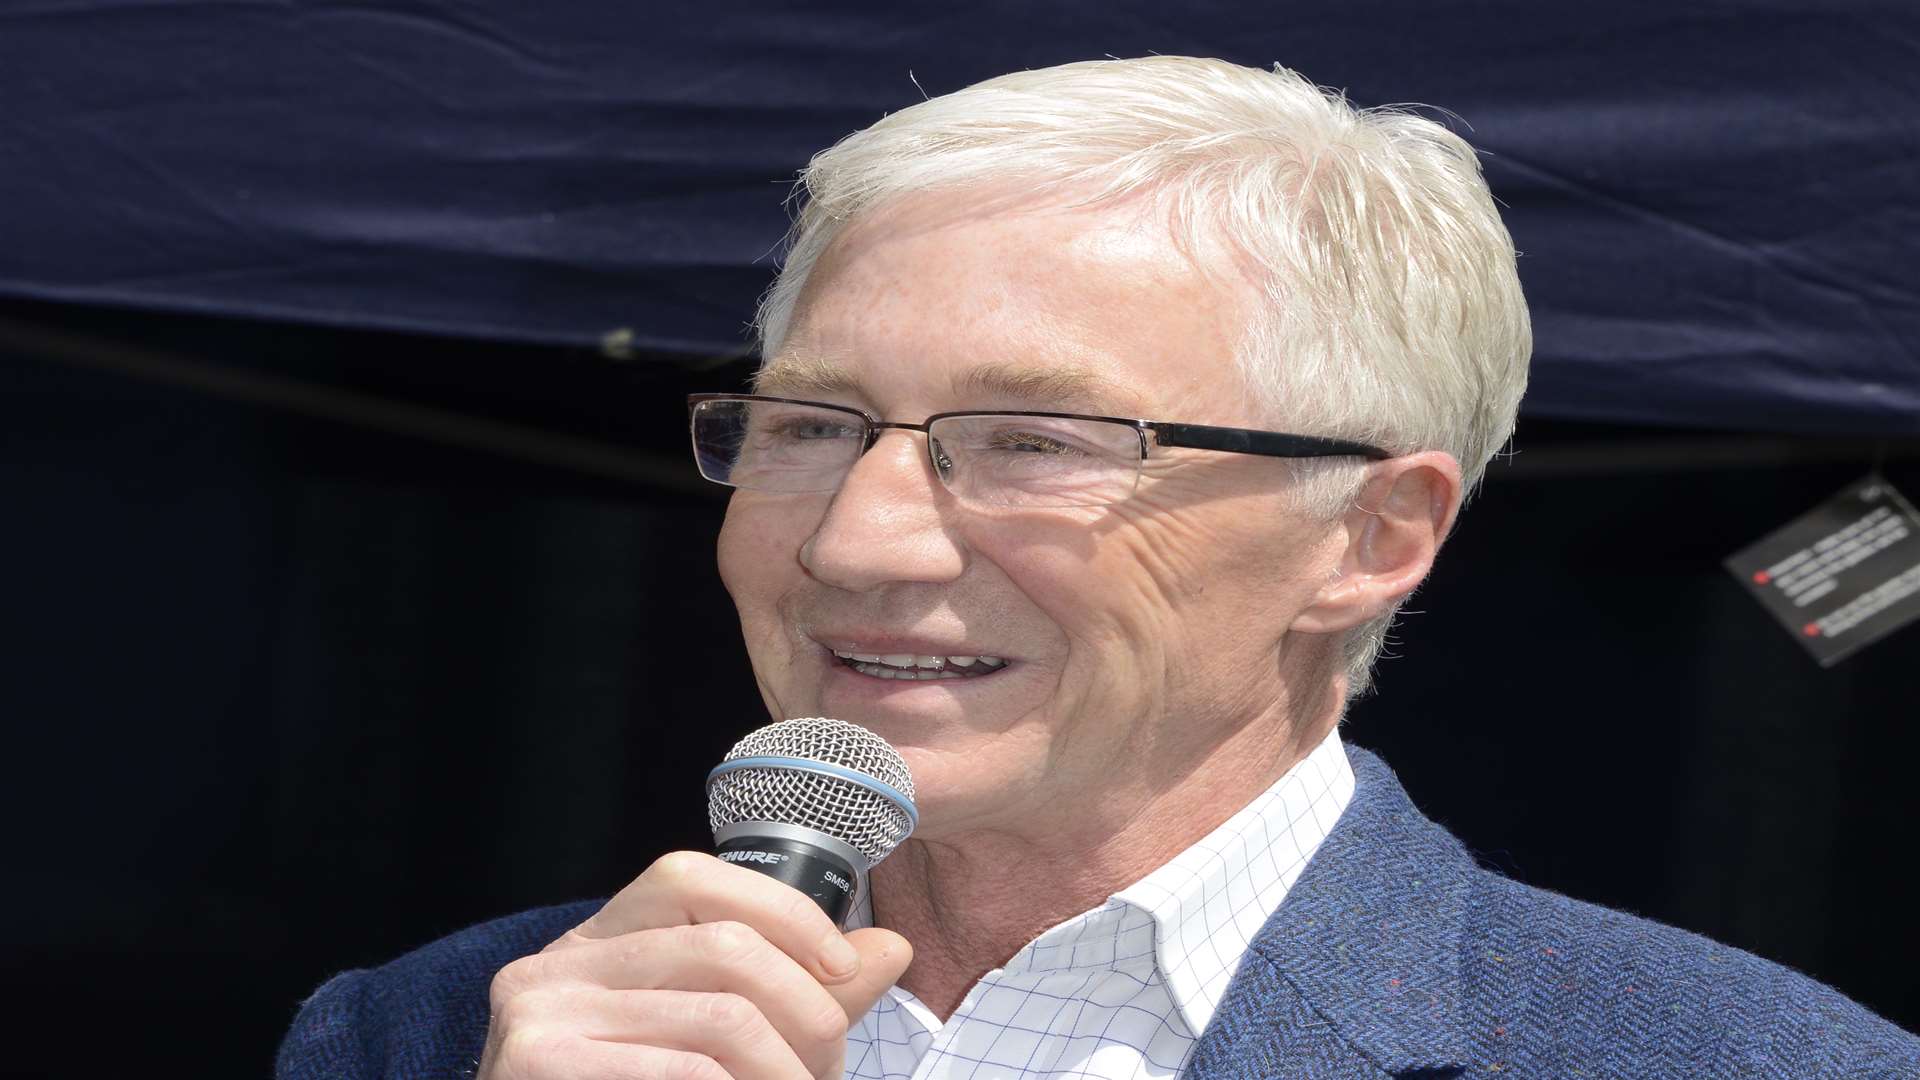 Paul O'Grady will be the new host of Blind Date on television. Photo: Paul Amos.